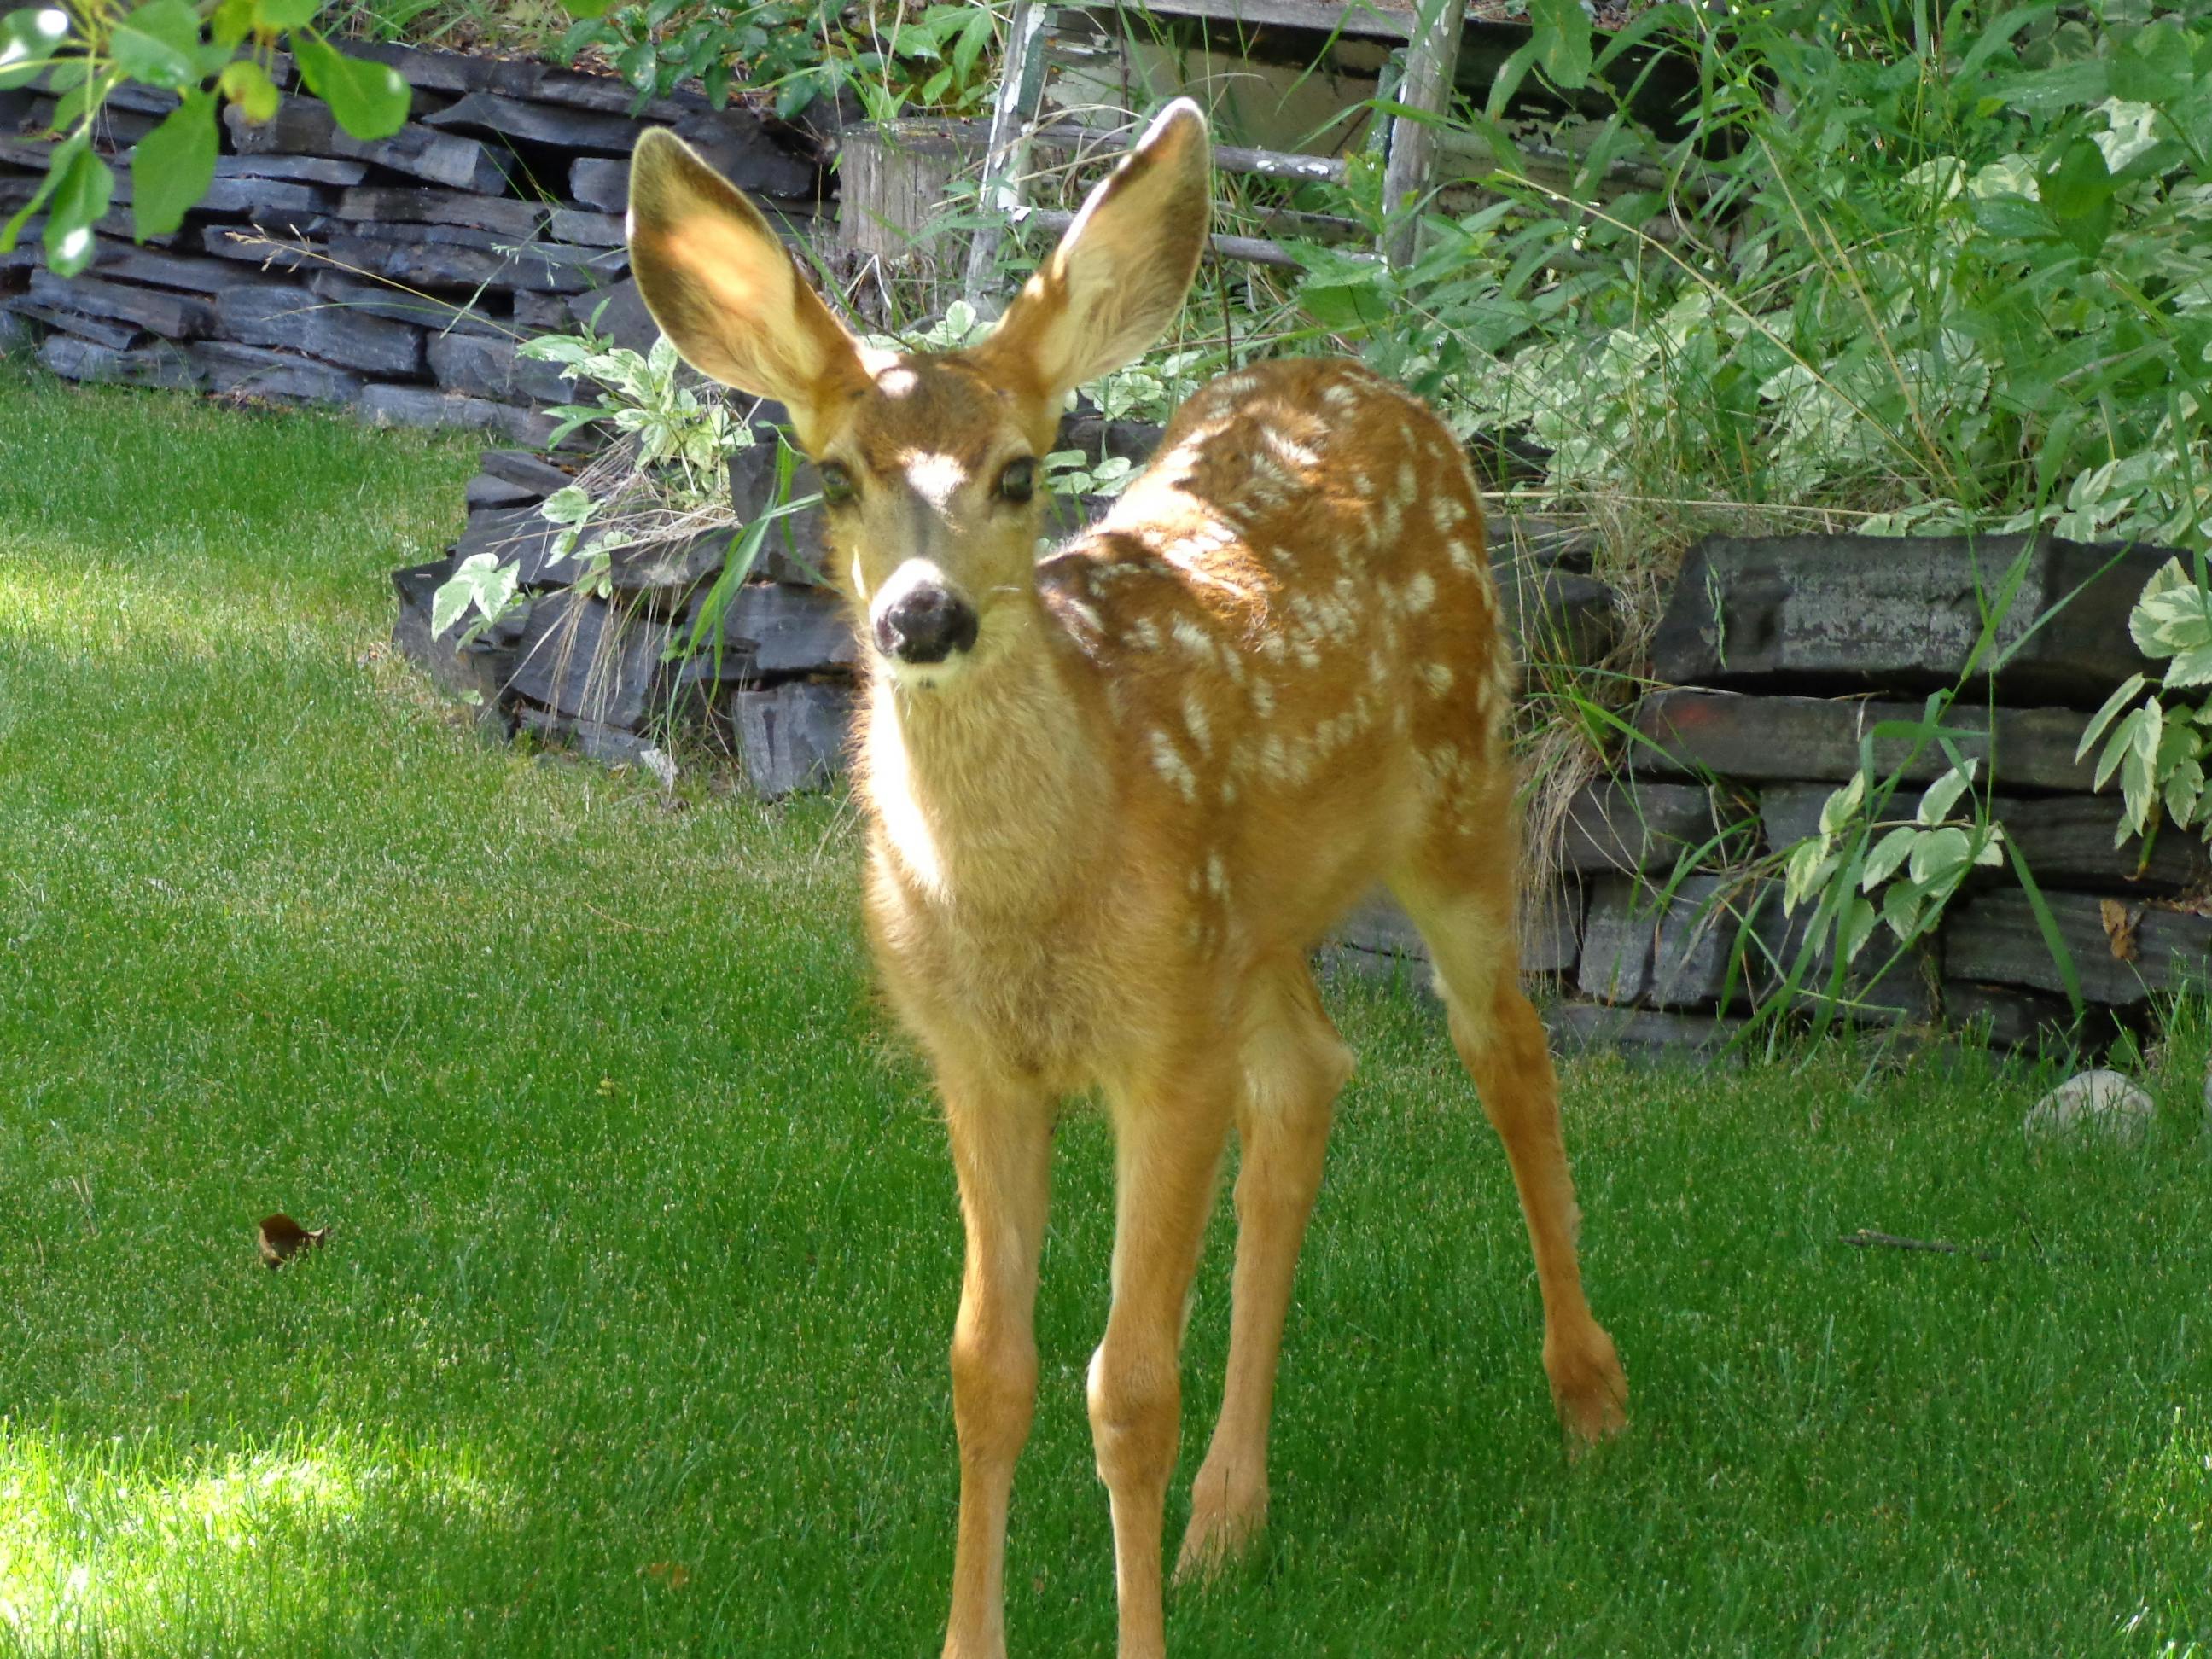 Bambi, our little deer, was born at in the forest behind Ballyrock Home